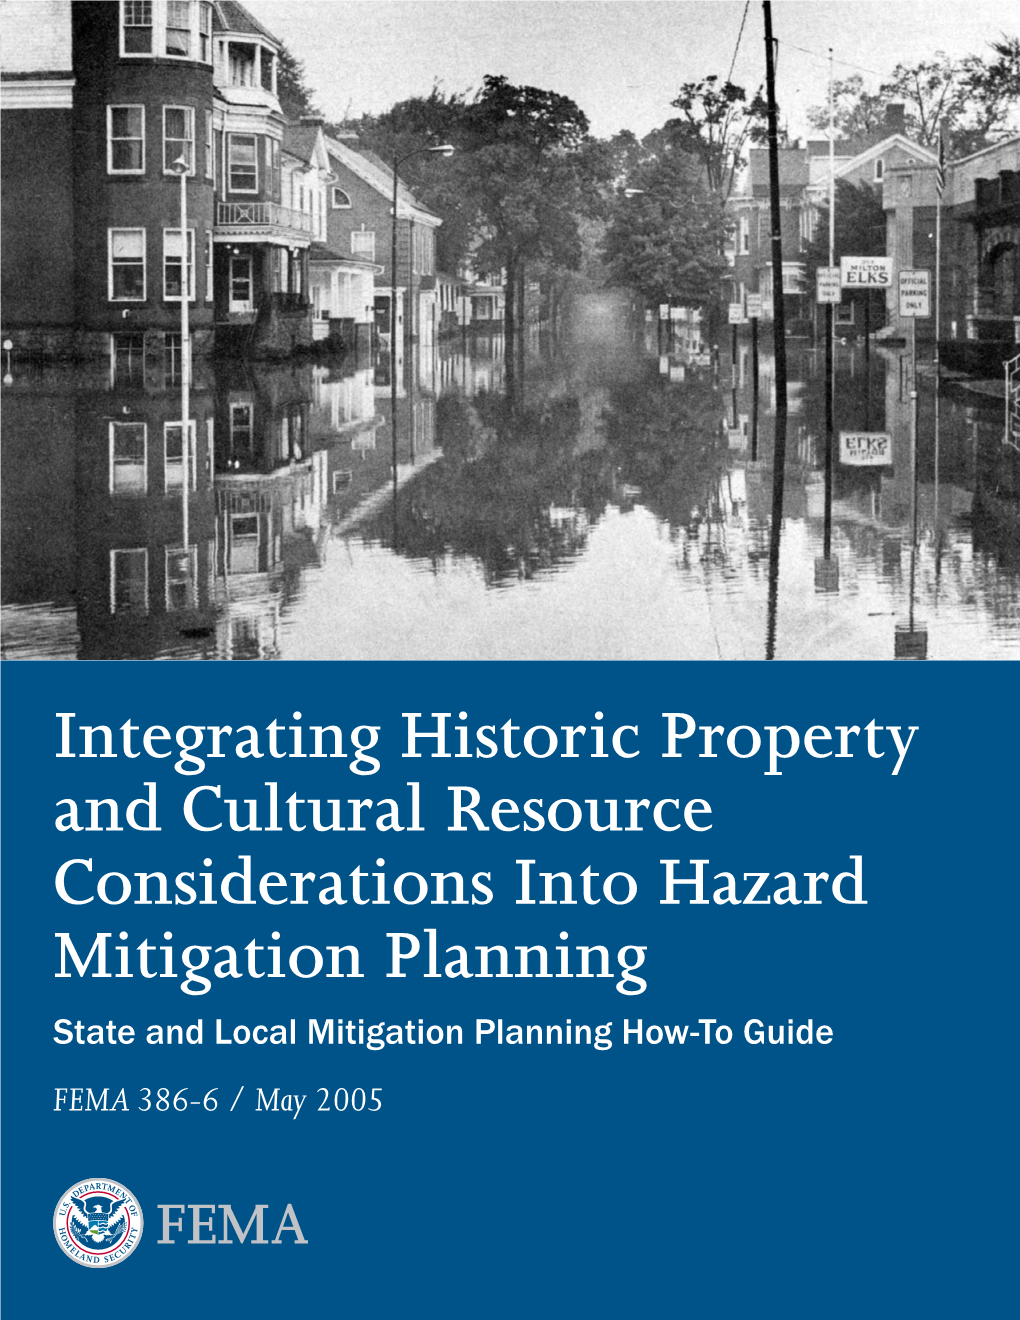 Integrating Historic Property and Cultural Resource Considerations